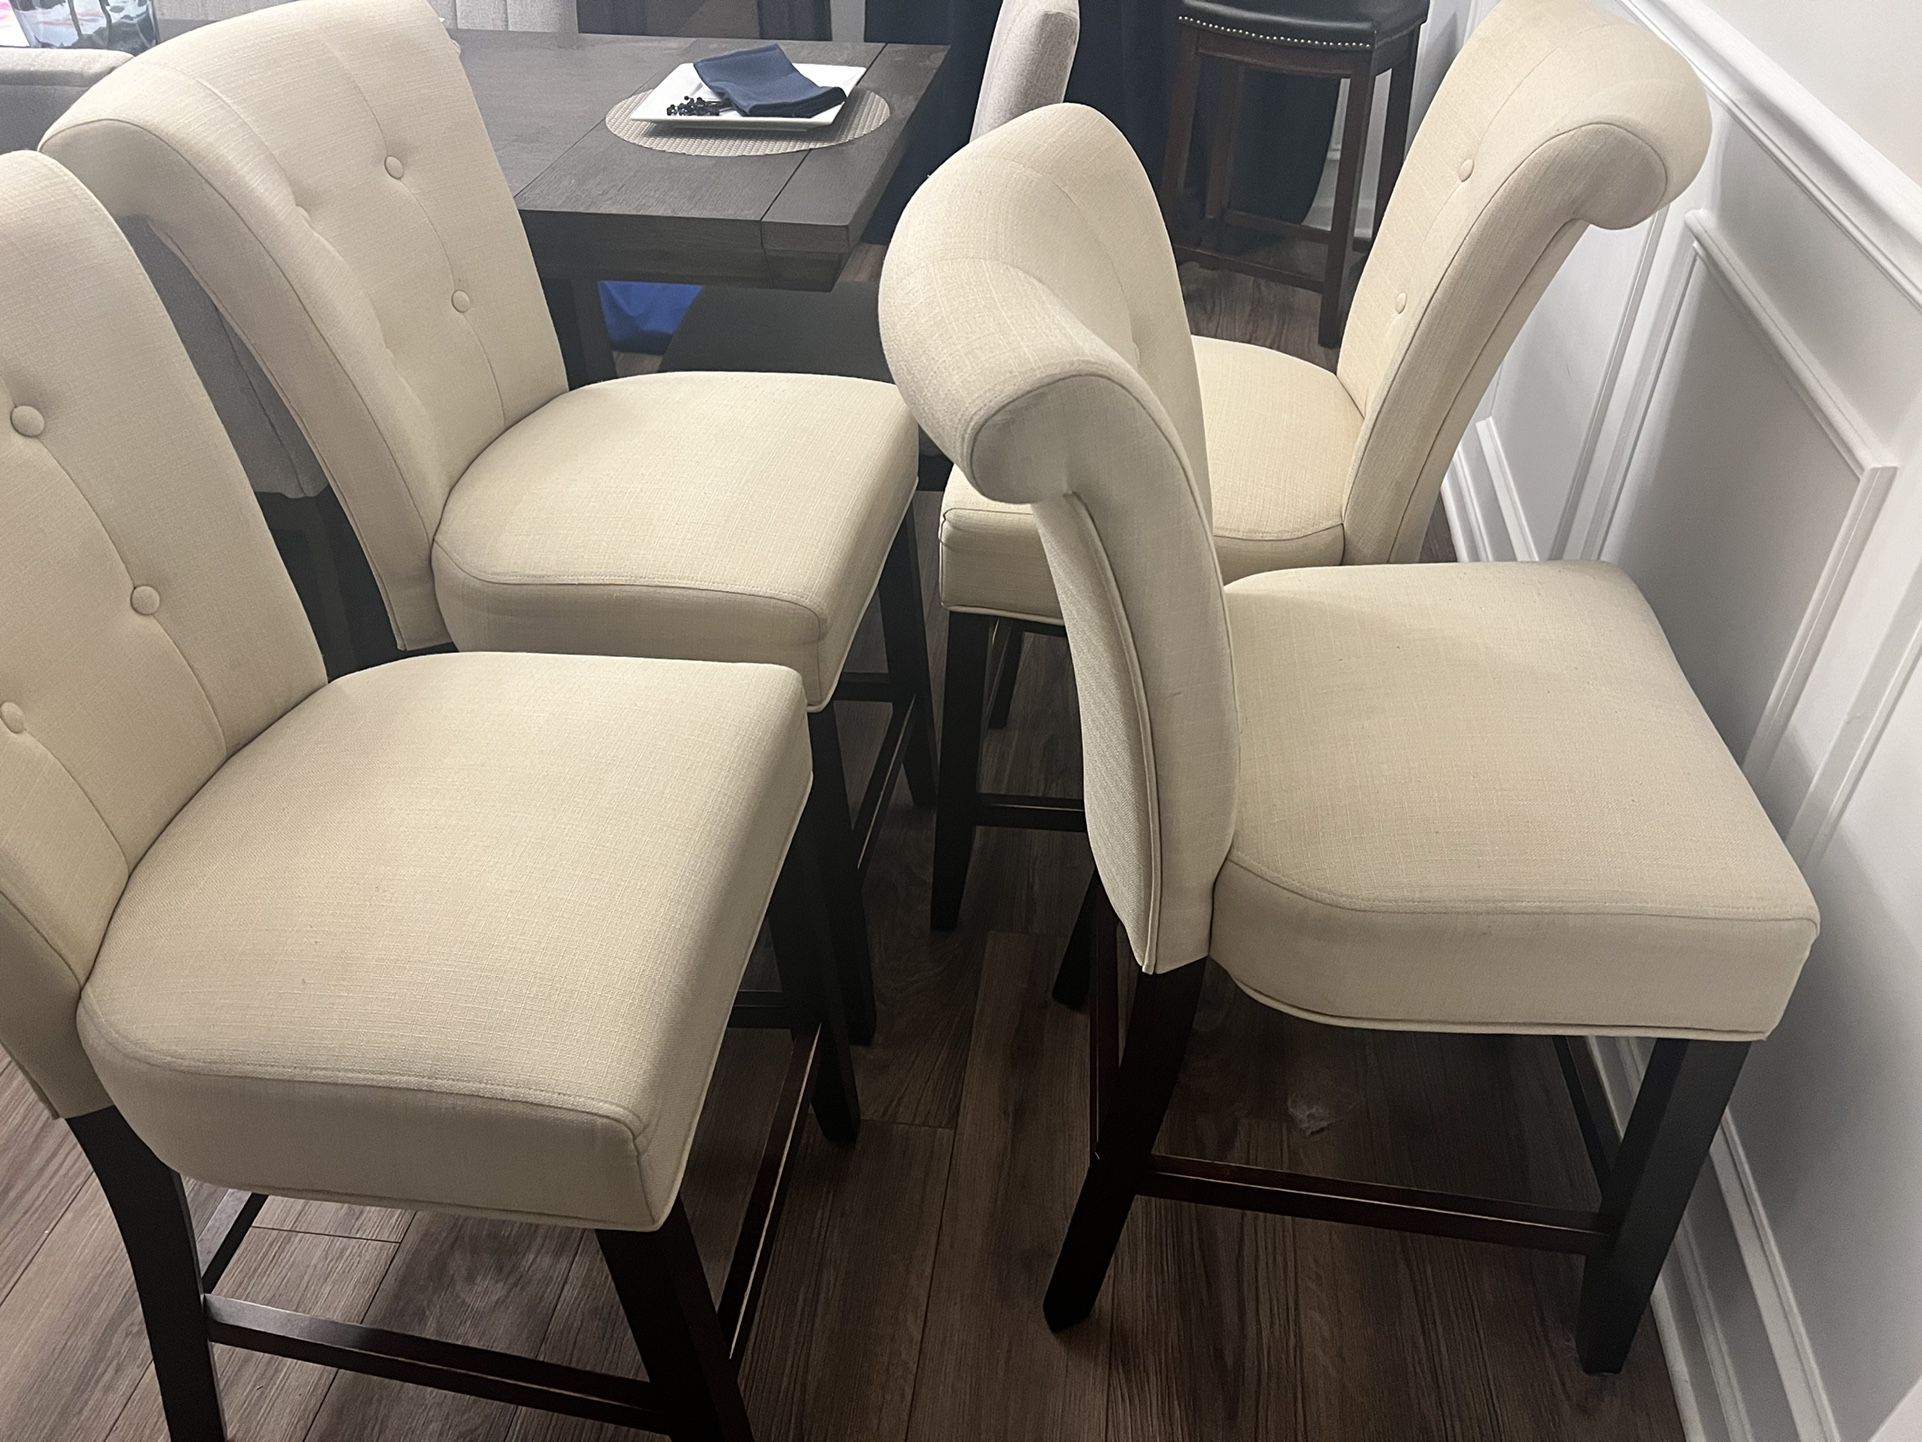 Counter Height Barstools $50 Each 